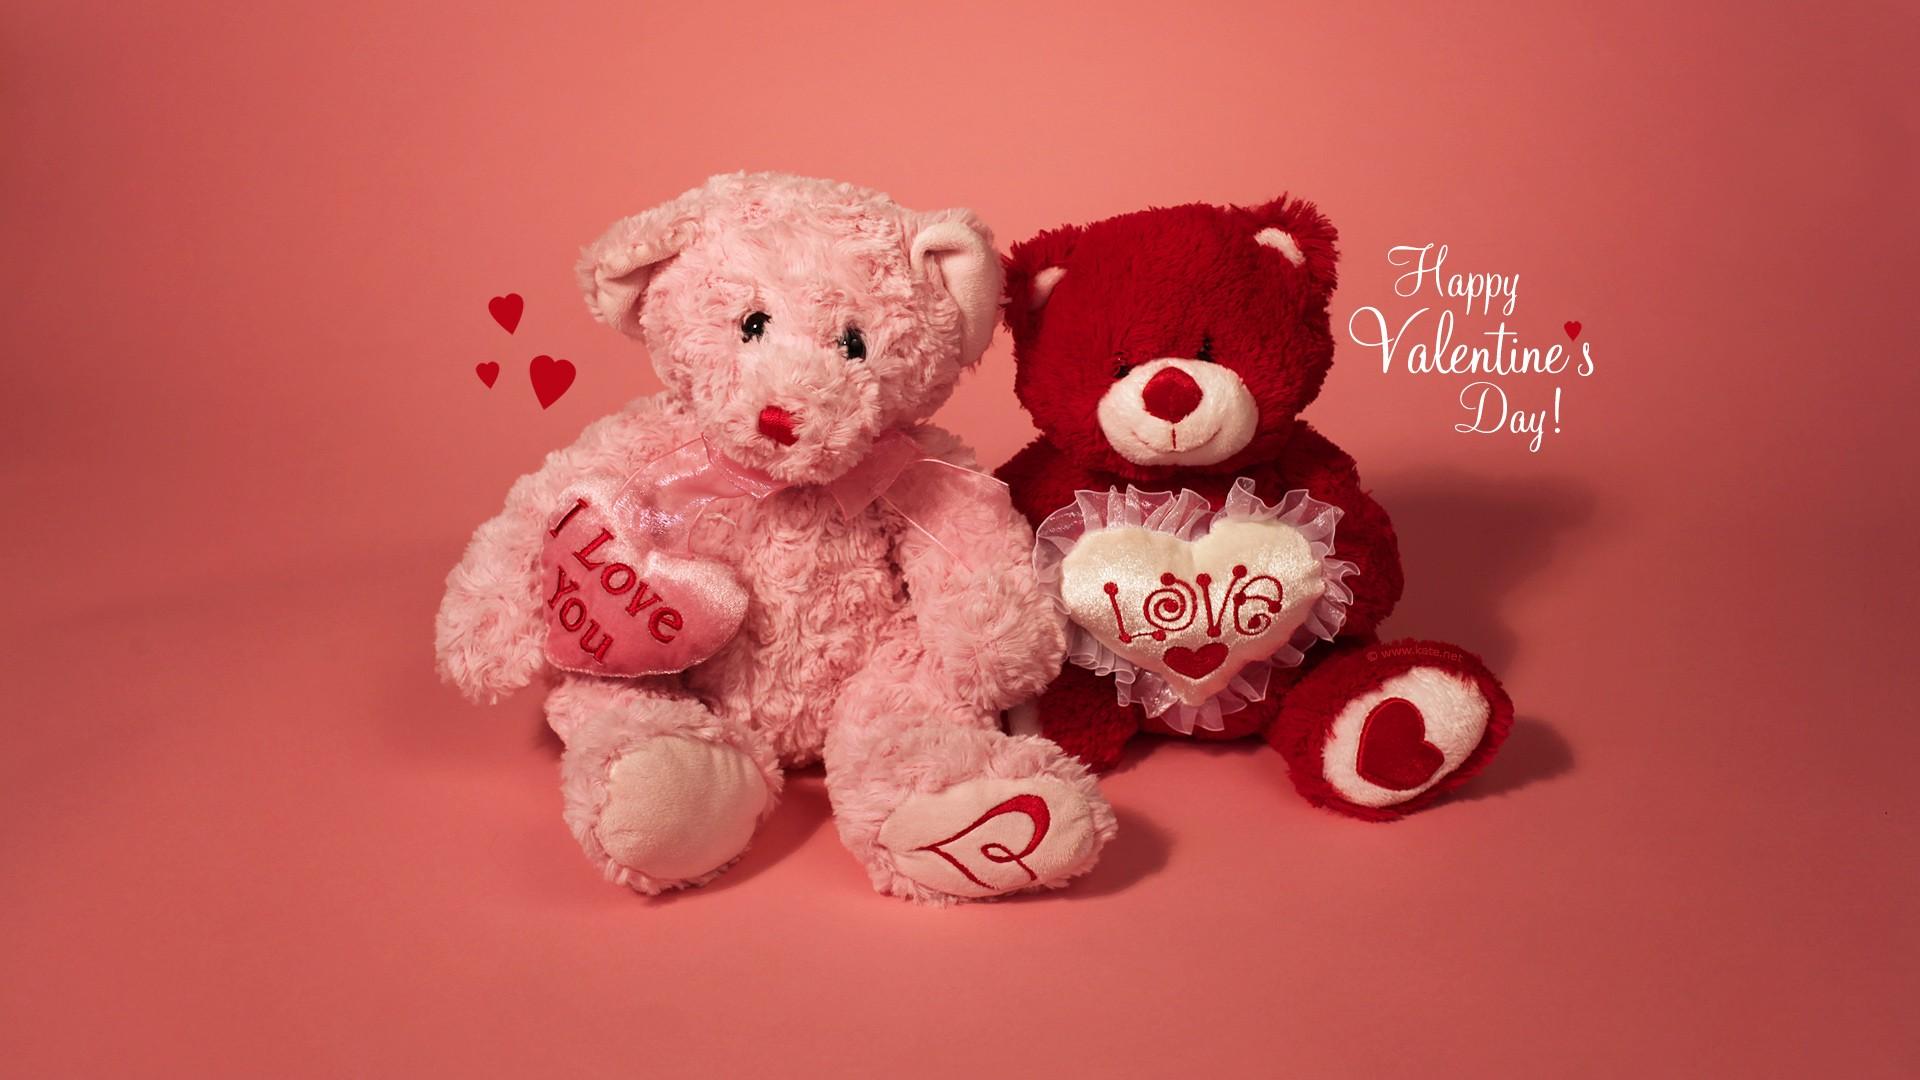 Free download Happy Valentines Day Cute Picture HD